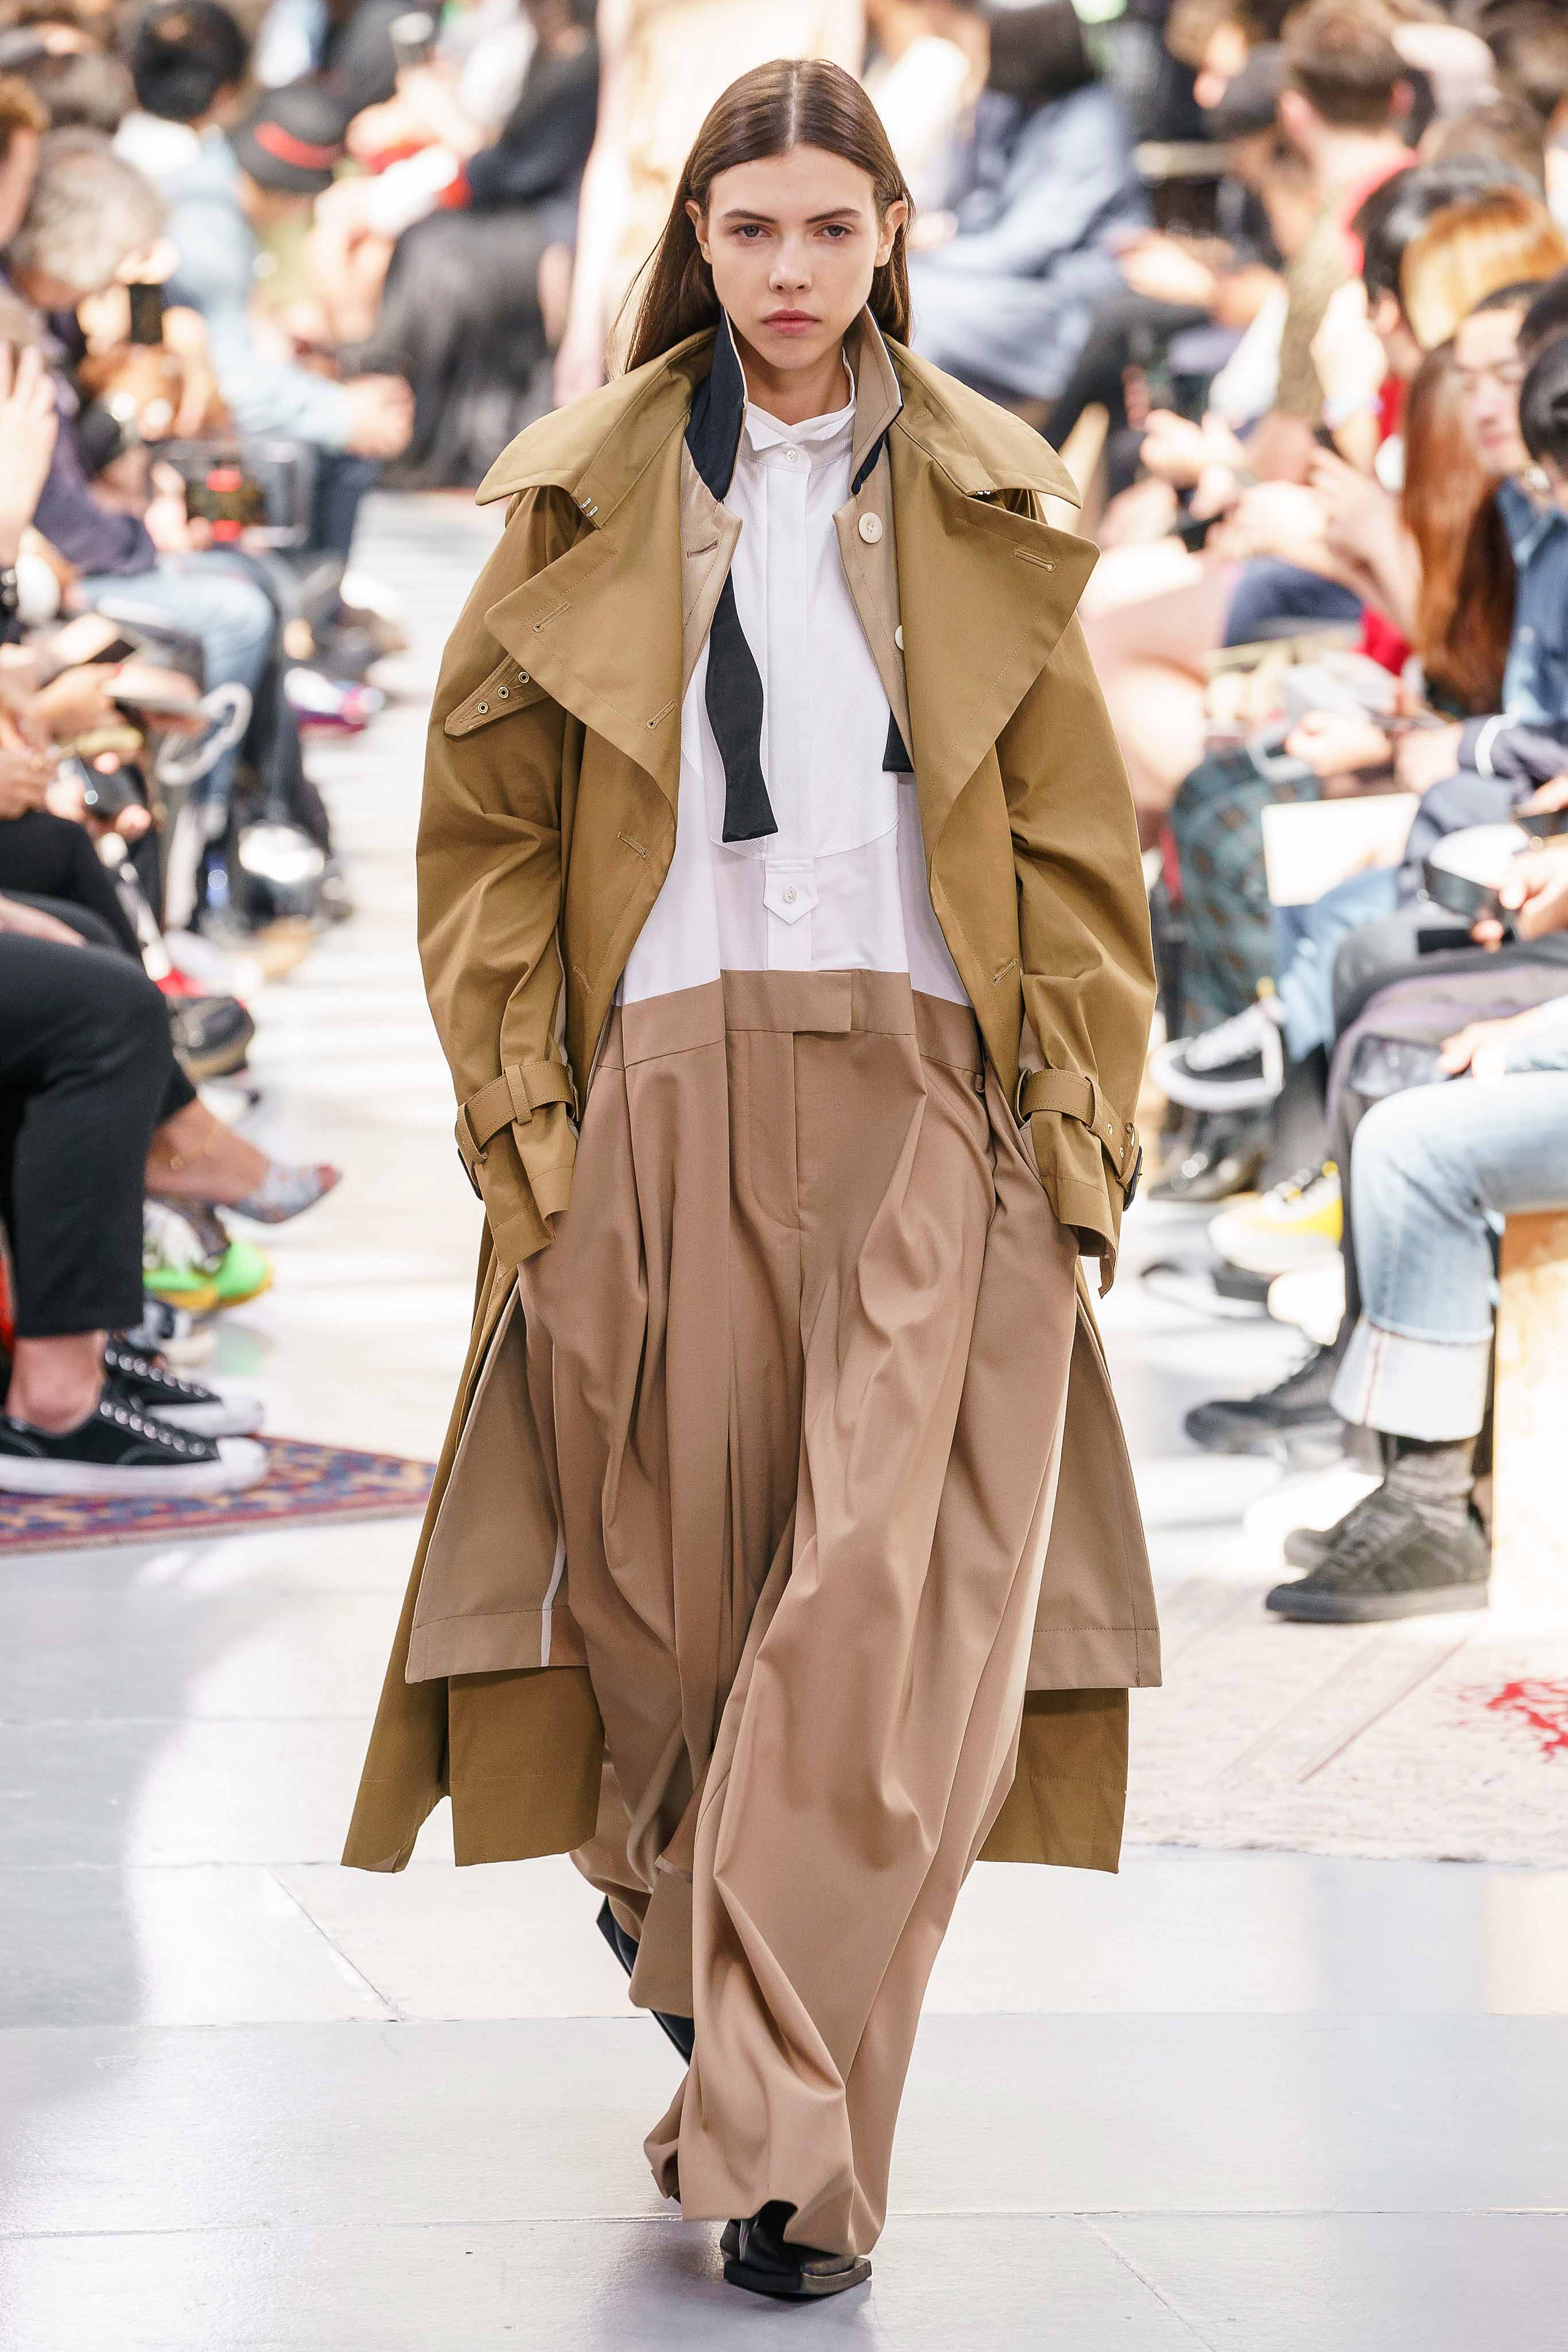 Sacai resort 2020 fashion week trends resort 2020 runway fashion trend report vogue Best trends from the resort 2020 collections